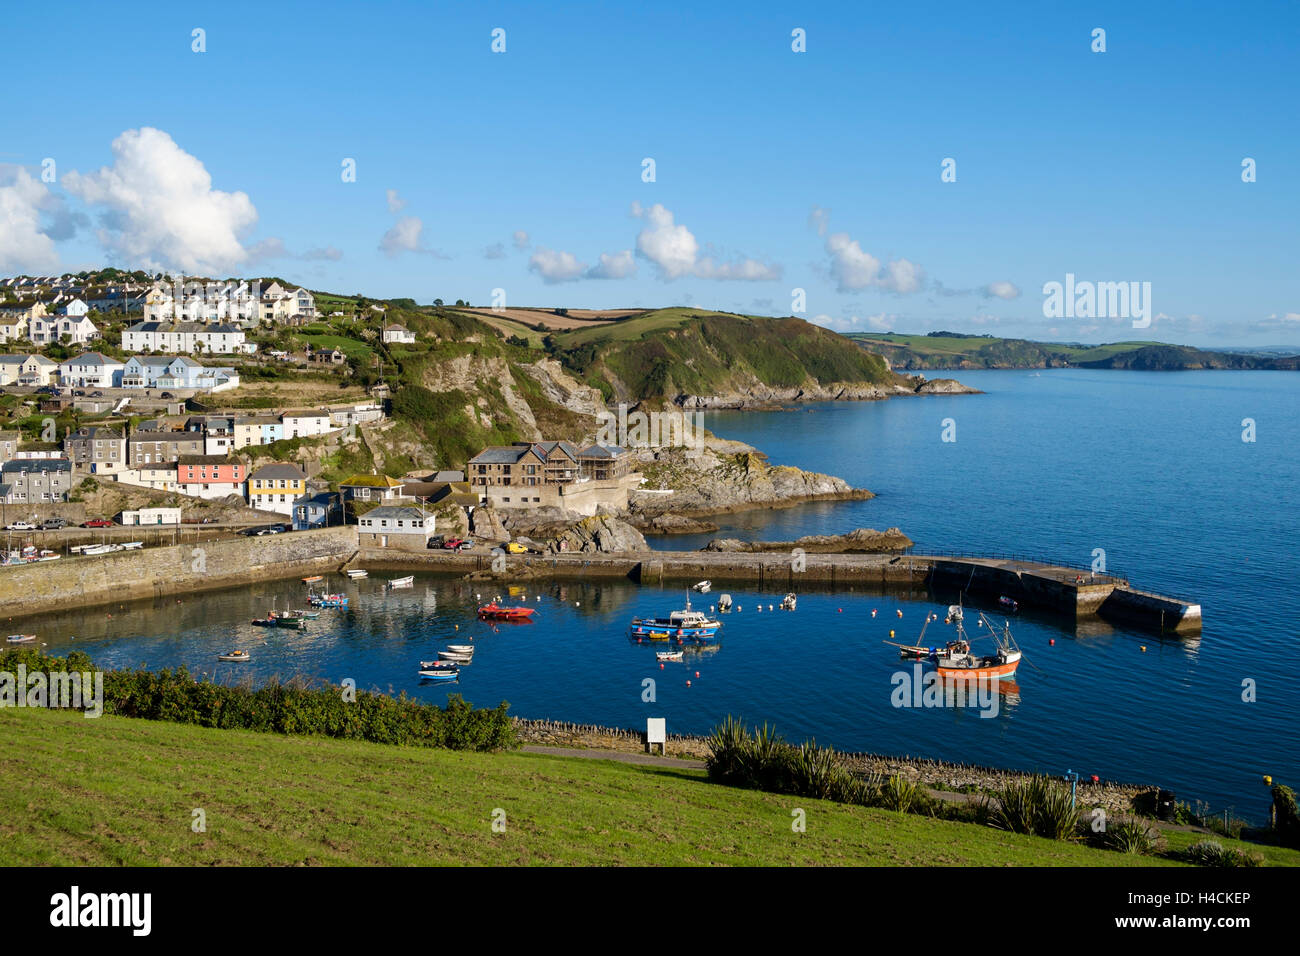 Mevagissey outer harbour & fishing port, Cornwall, England, UK Stock Photo